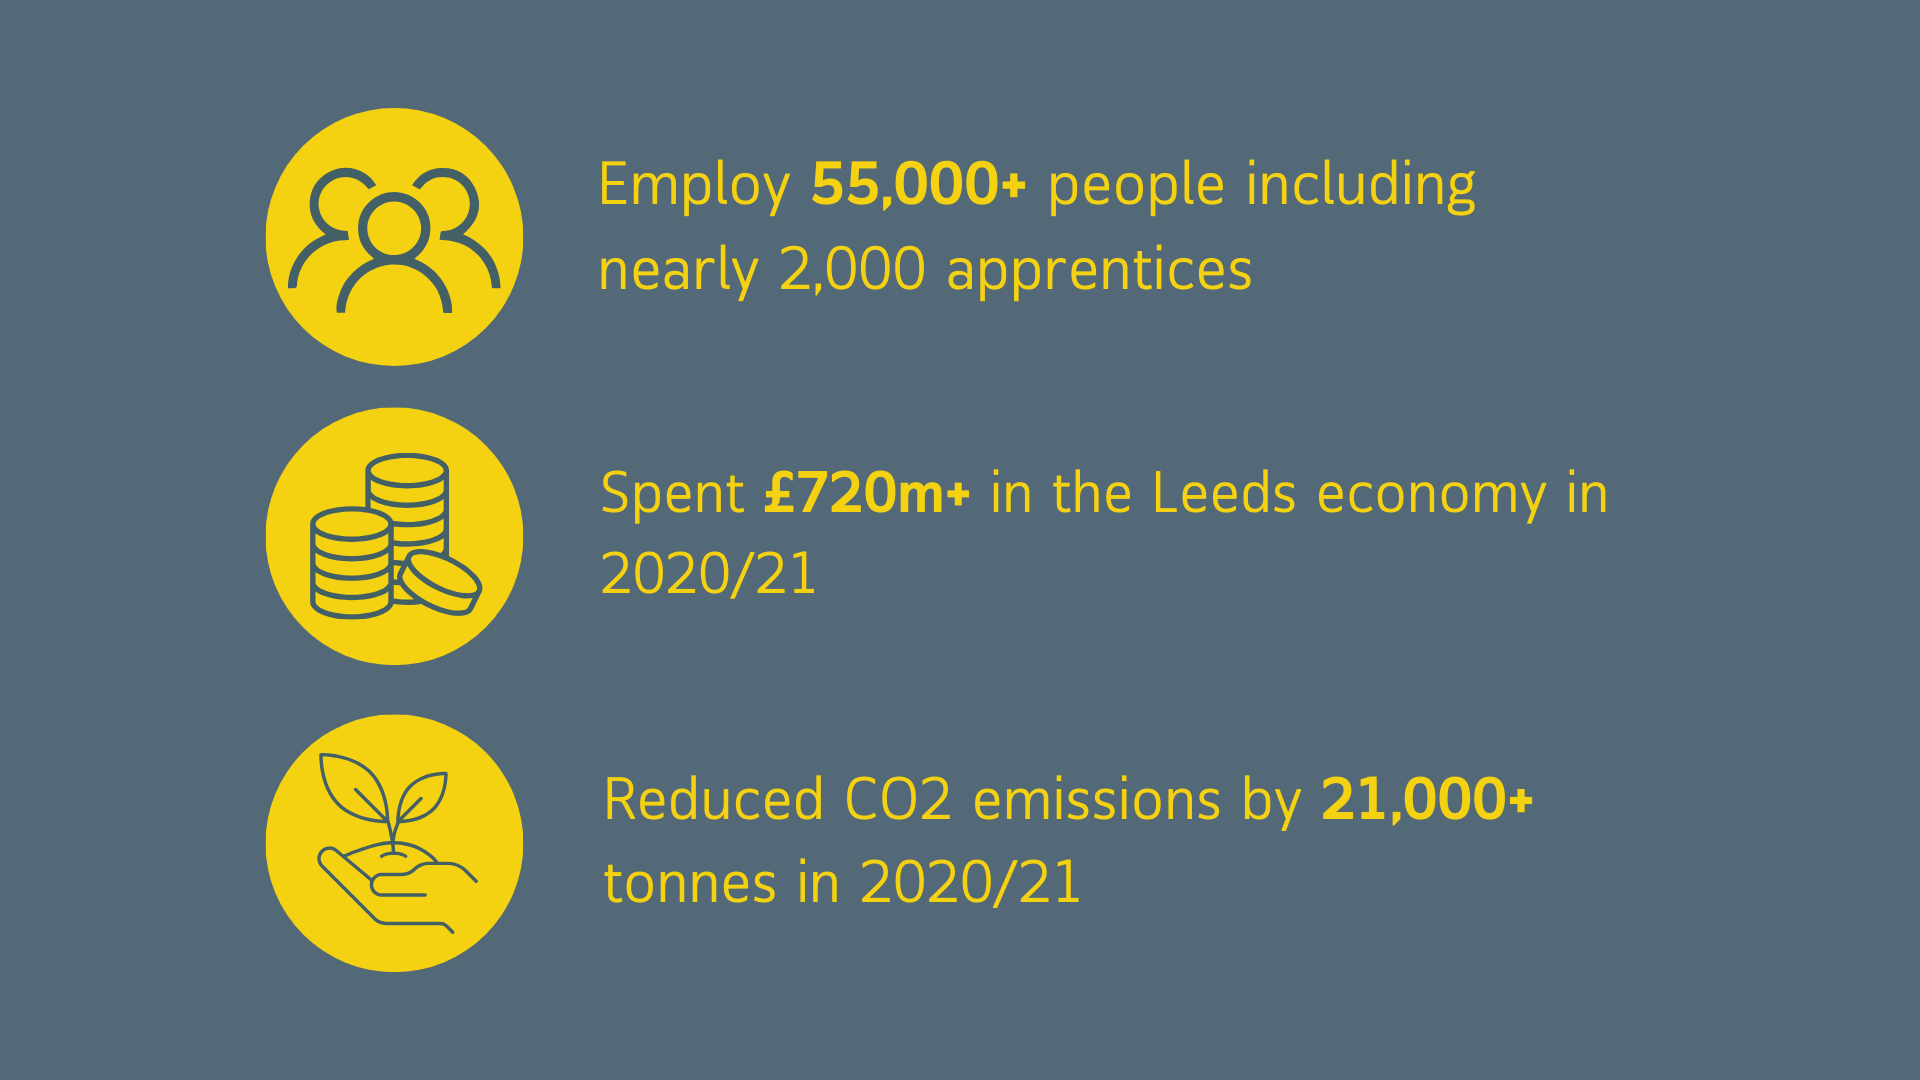 The graphic shows the impact the Leeds Anchors Network has on numbers of staff employed in the city, local spend and success in reducing co2 emissions